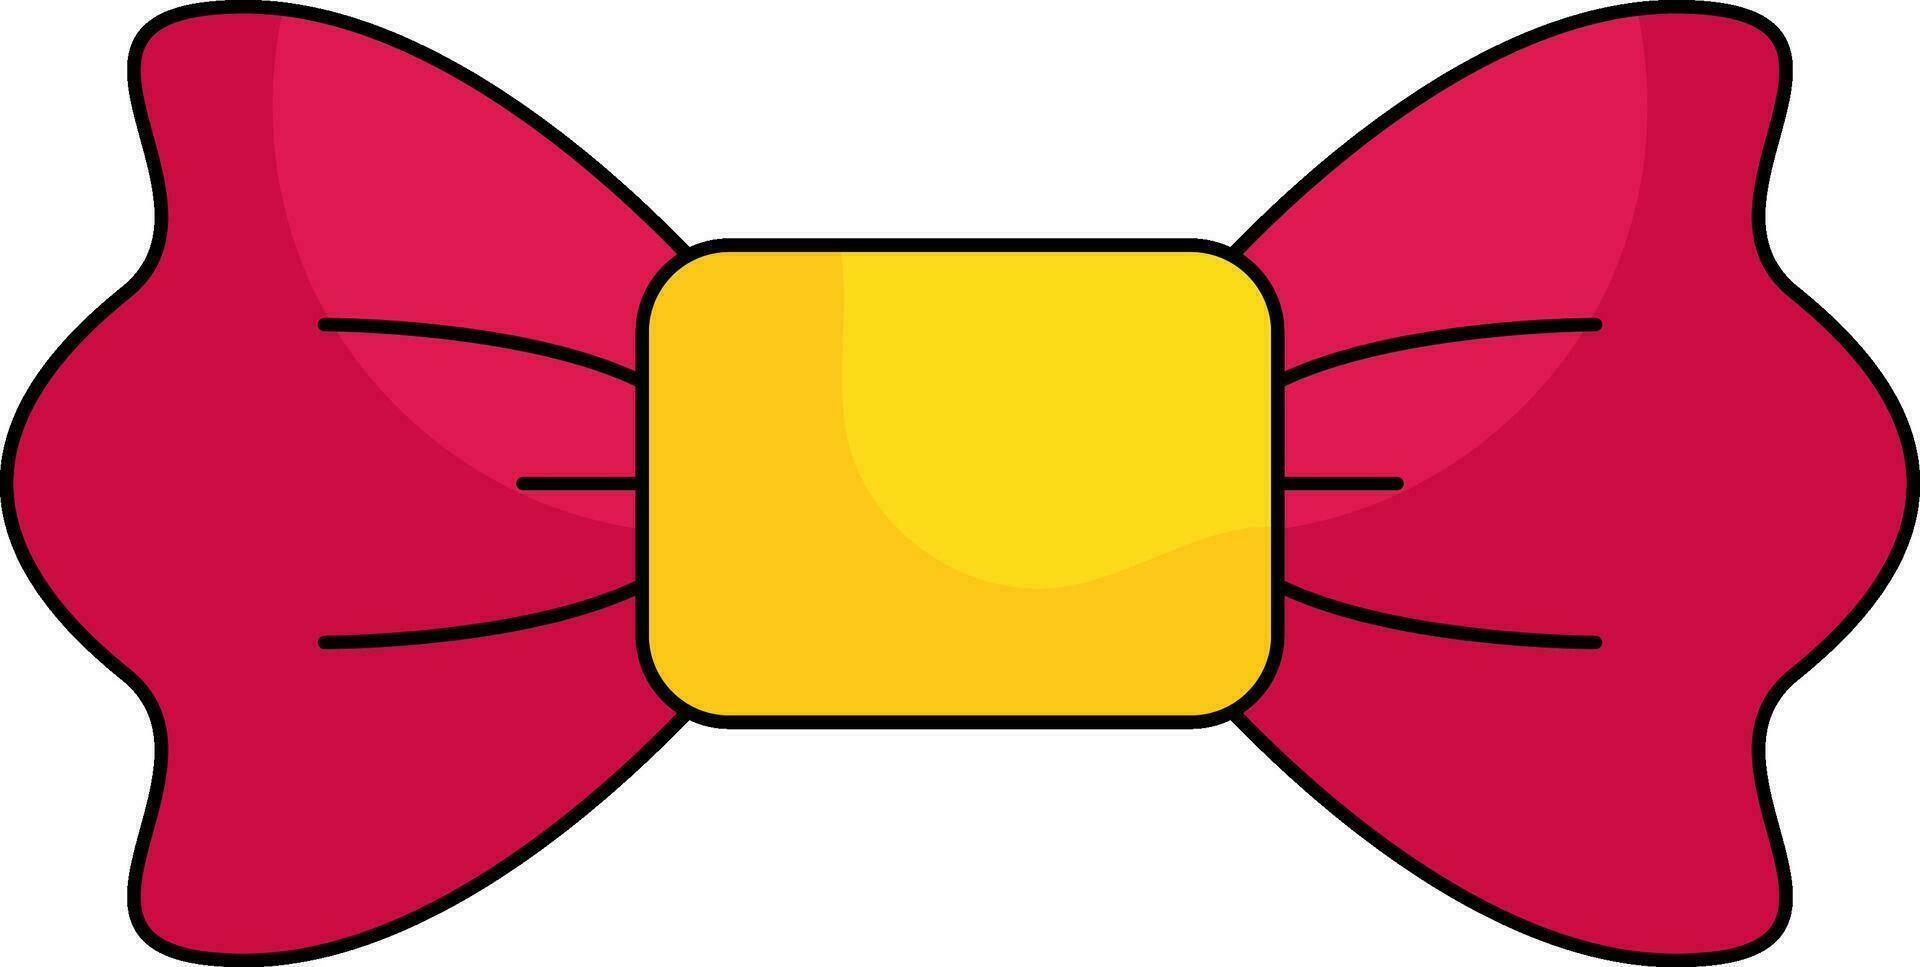 Pink And Yellow Bow Icon In Flat style. vector